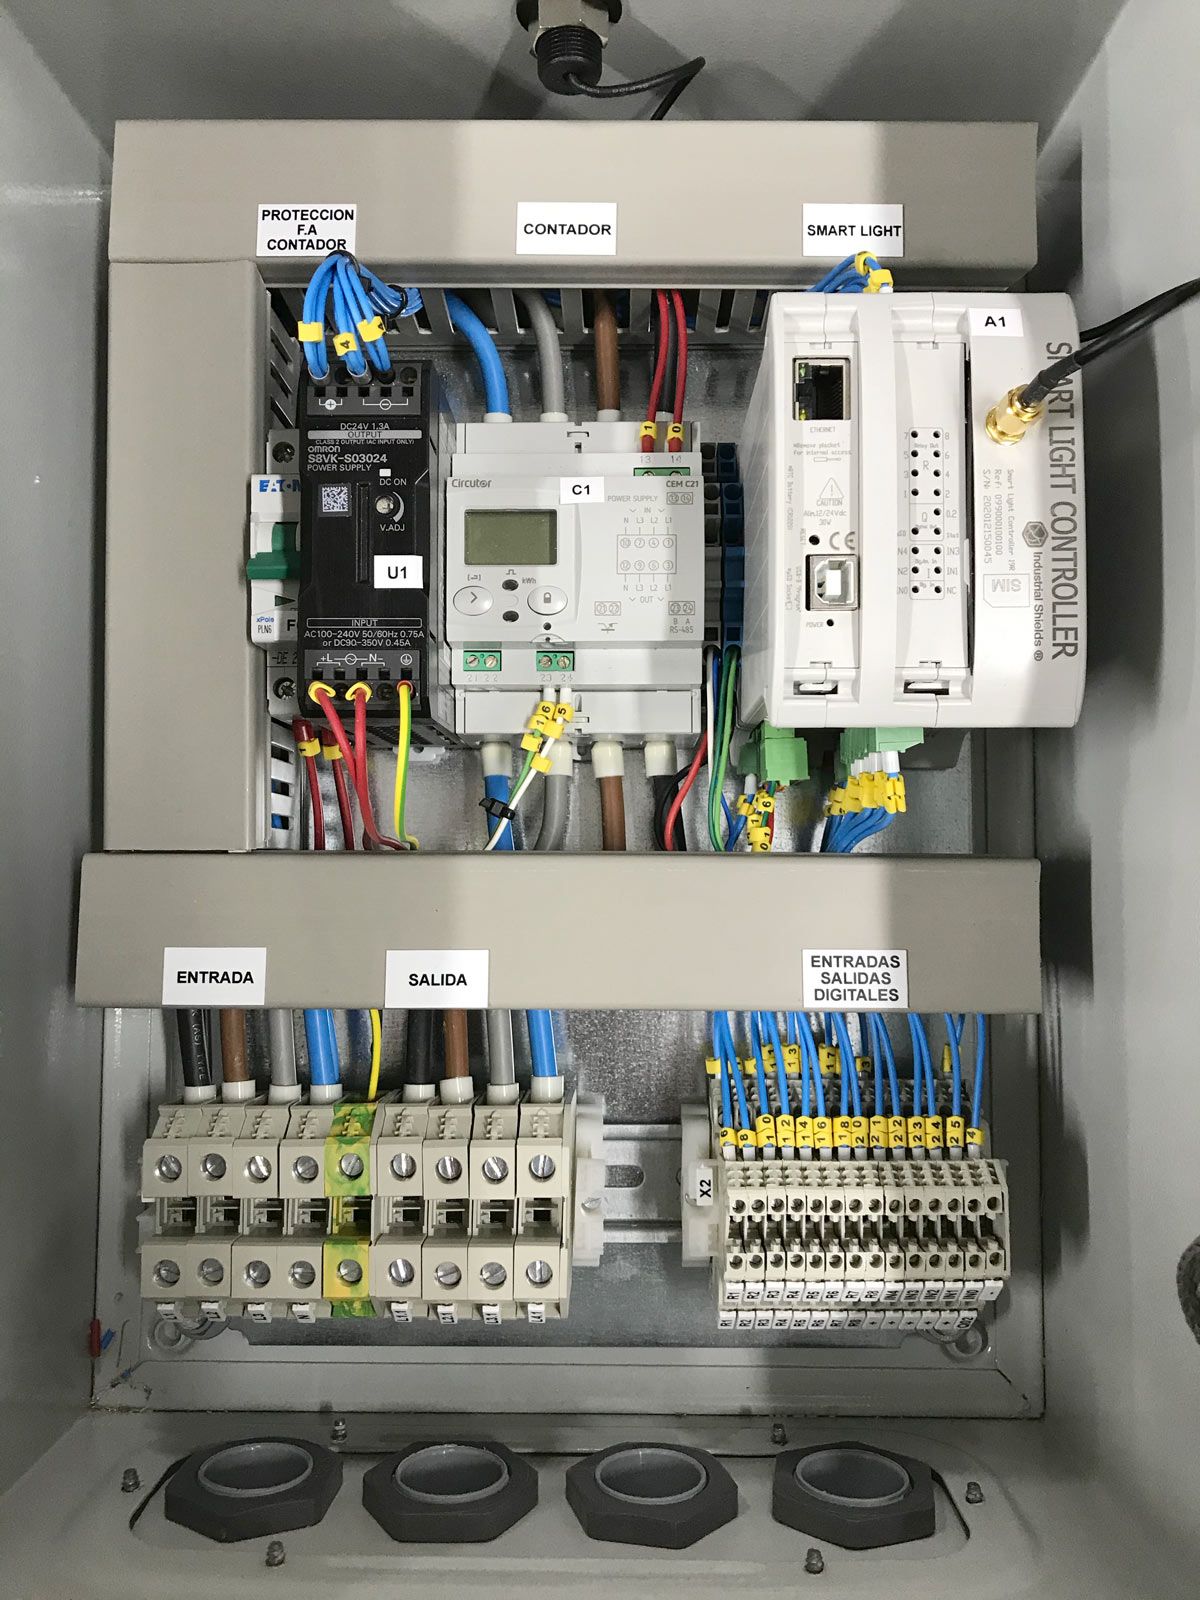 Smart Light Controller - Full Electric Cabinet